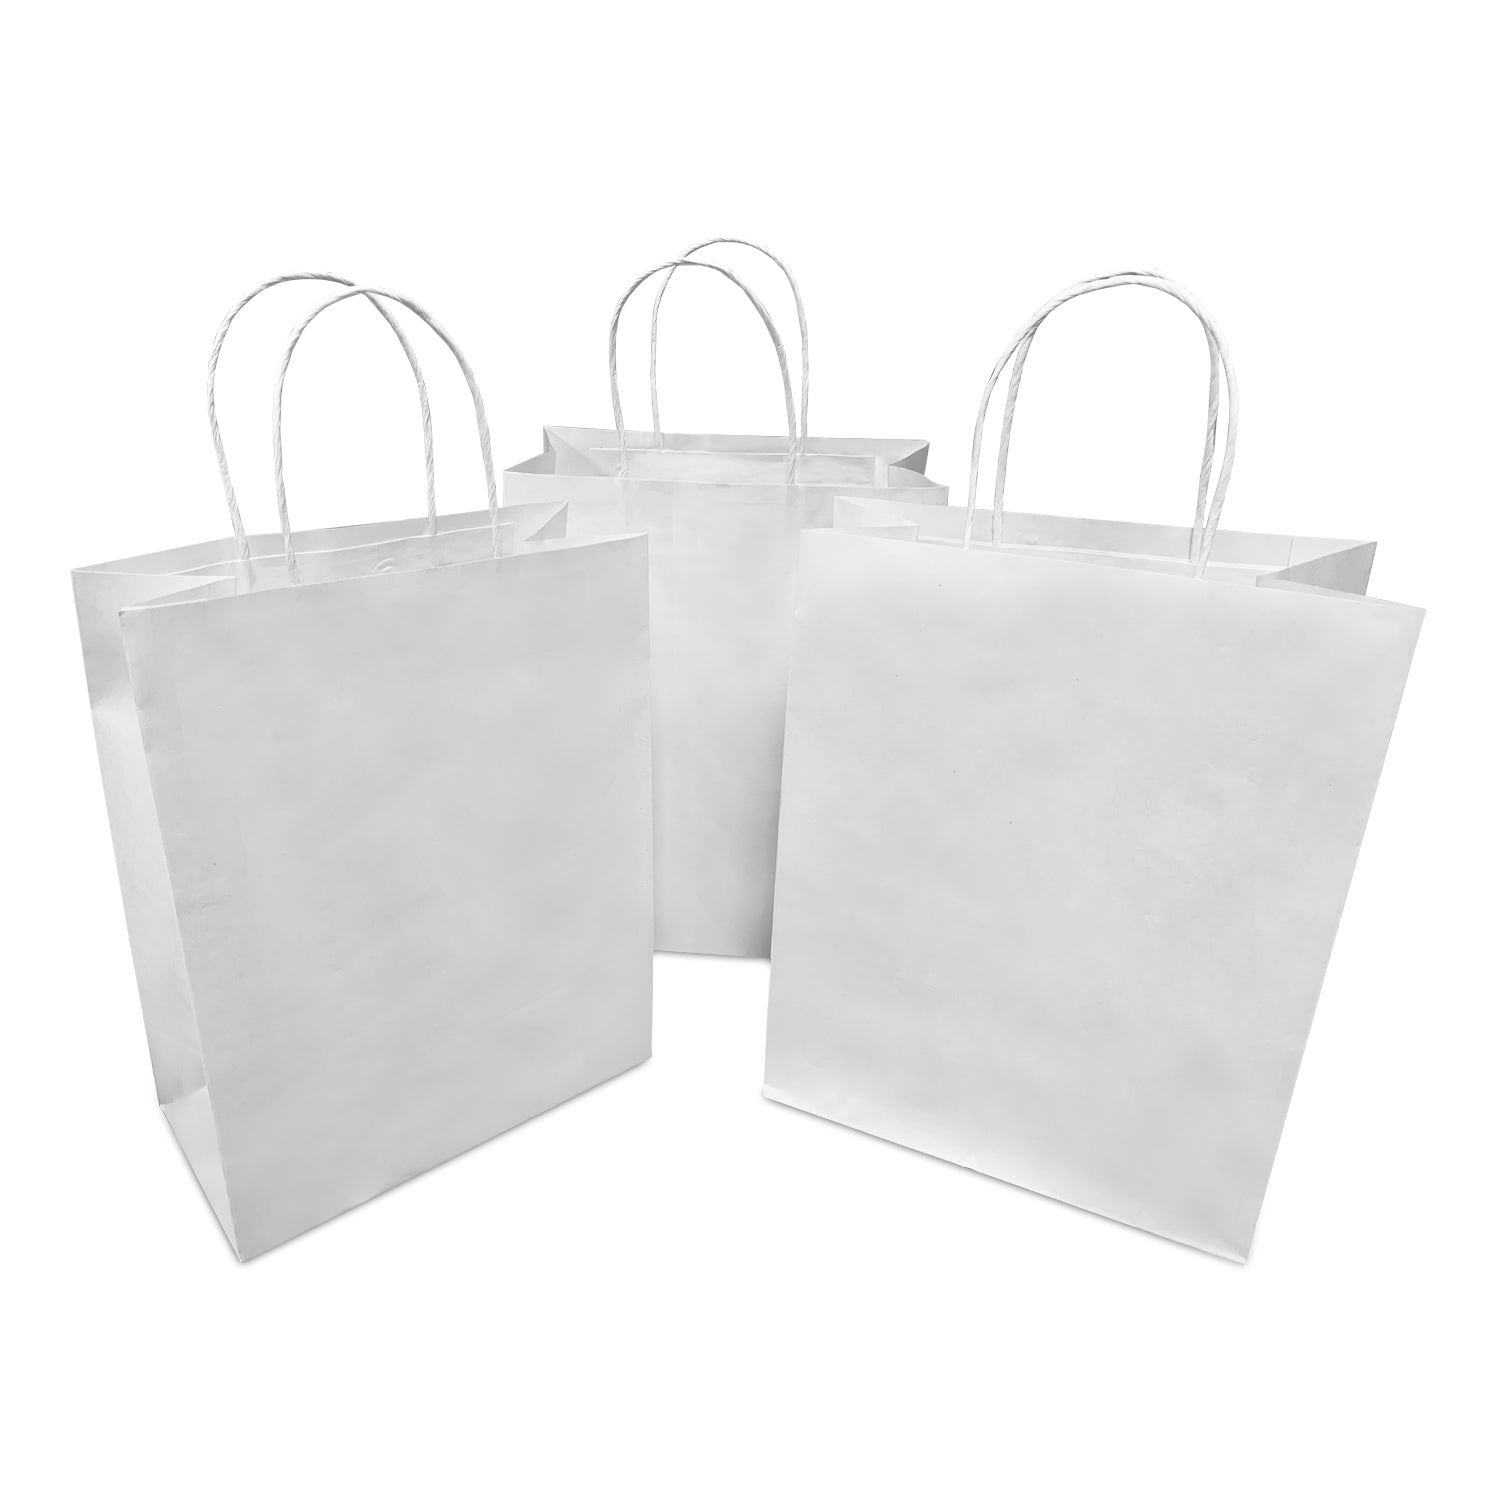 250 Pcs, Debbie, 10x5x13 inches, White Kraft Paper Bags, with Twisted Handle